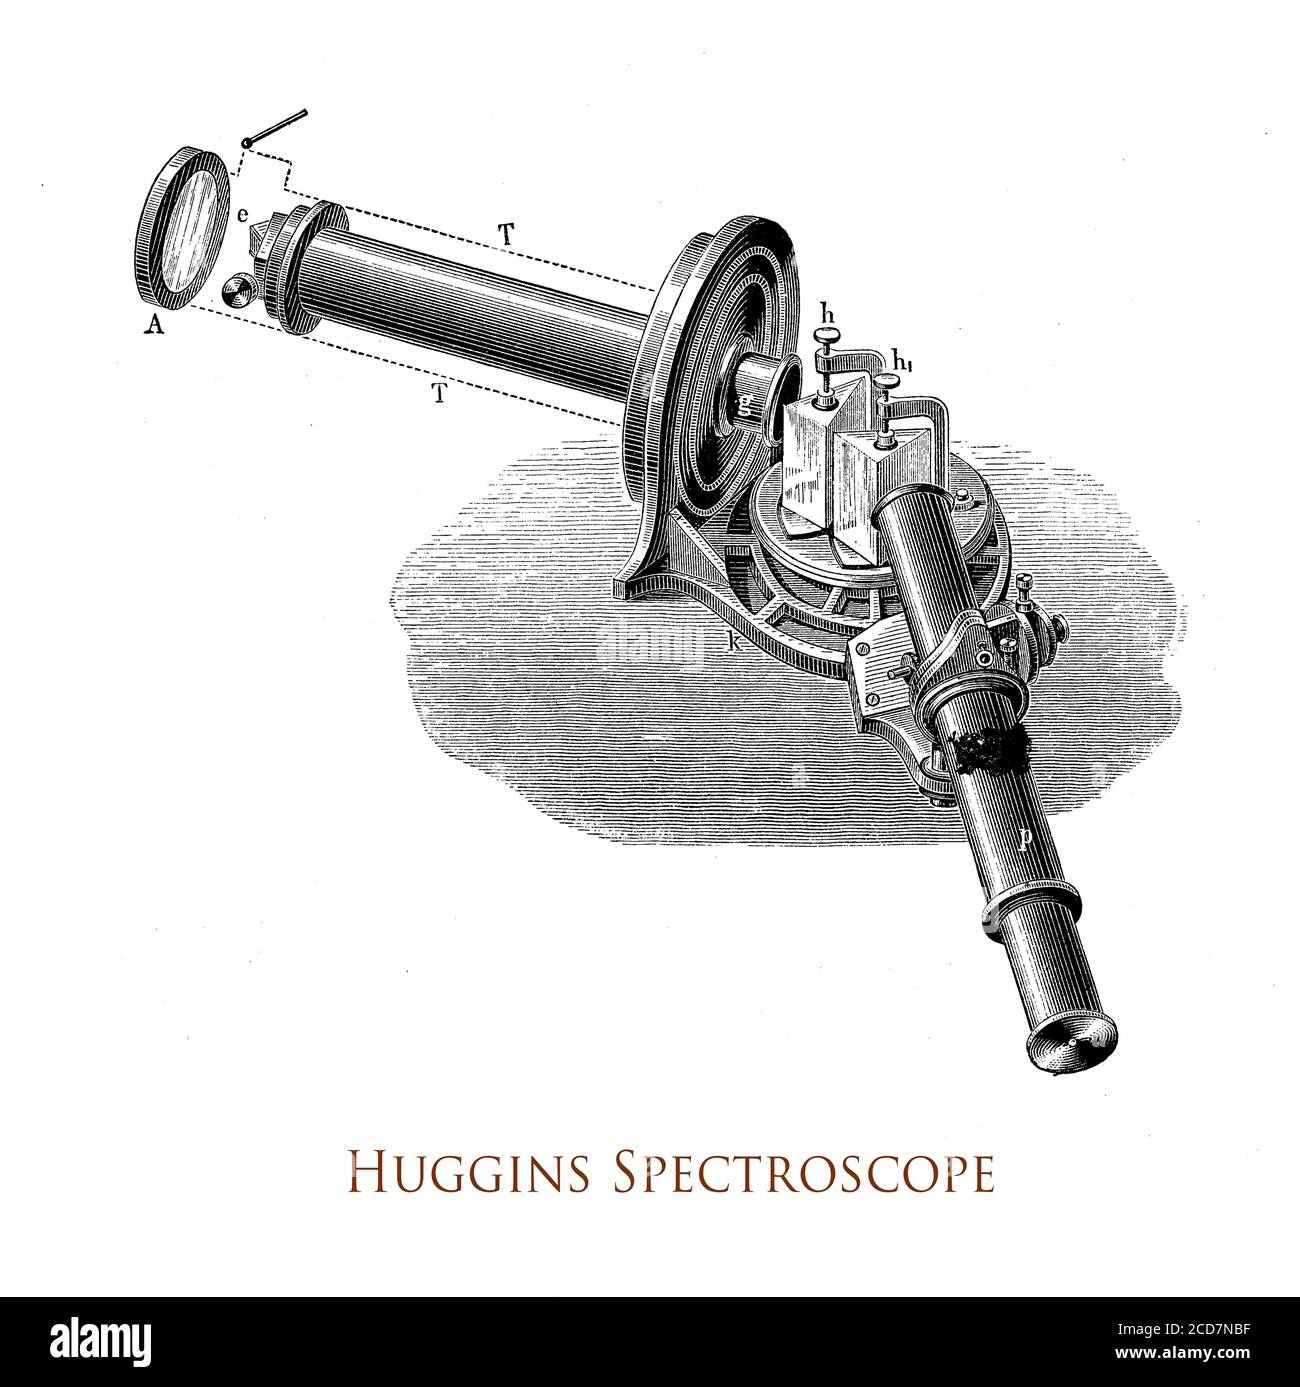 Huggins spectroscope developed by Sir William Huggins with the technical innovation of by widening the slit and measuring the radial velocity of a star and to study the evolution of the universe Stock Photo